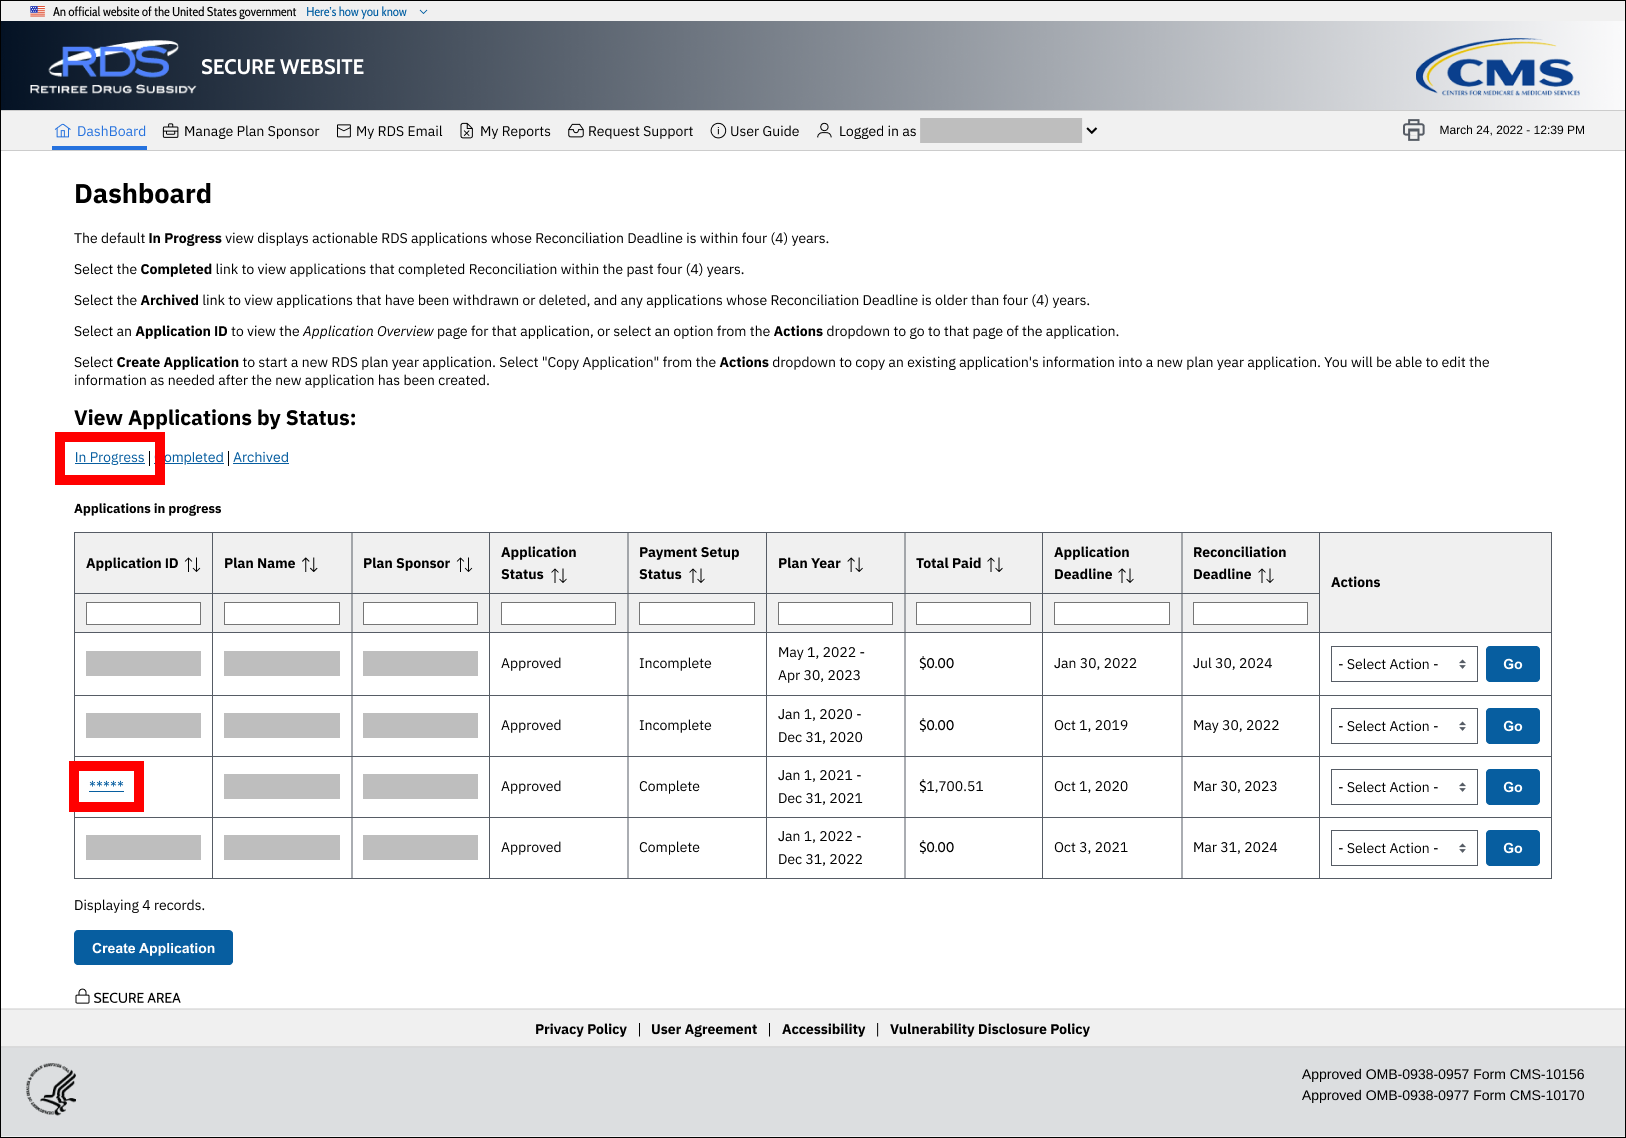 Dashboard page with sample data. In Progress and Application ID links are highlighted.